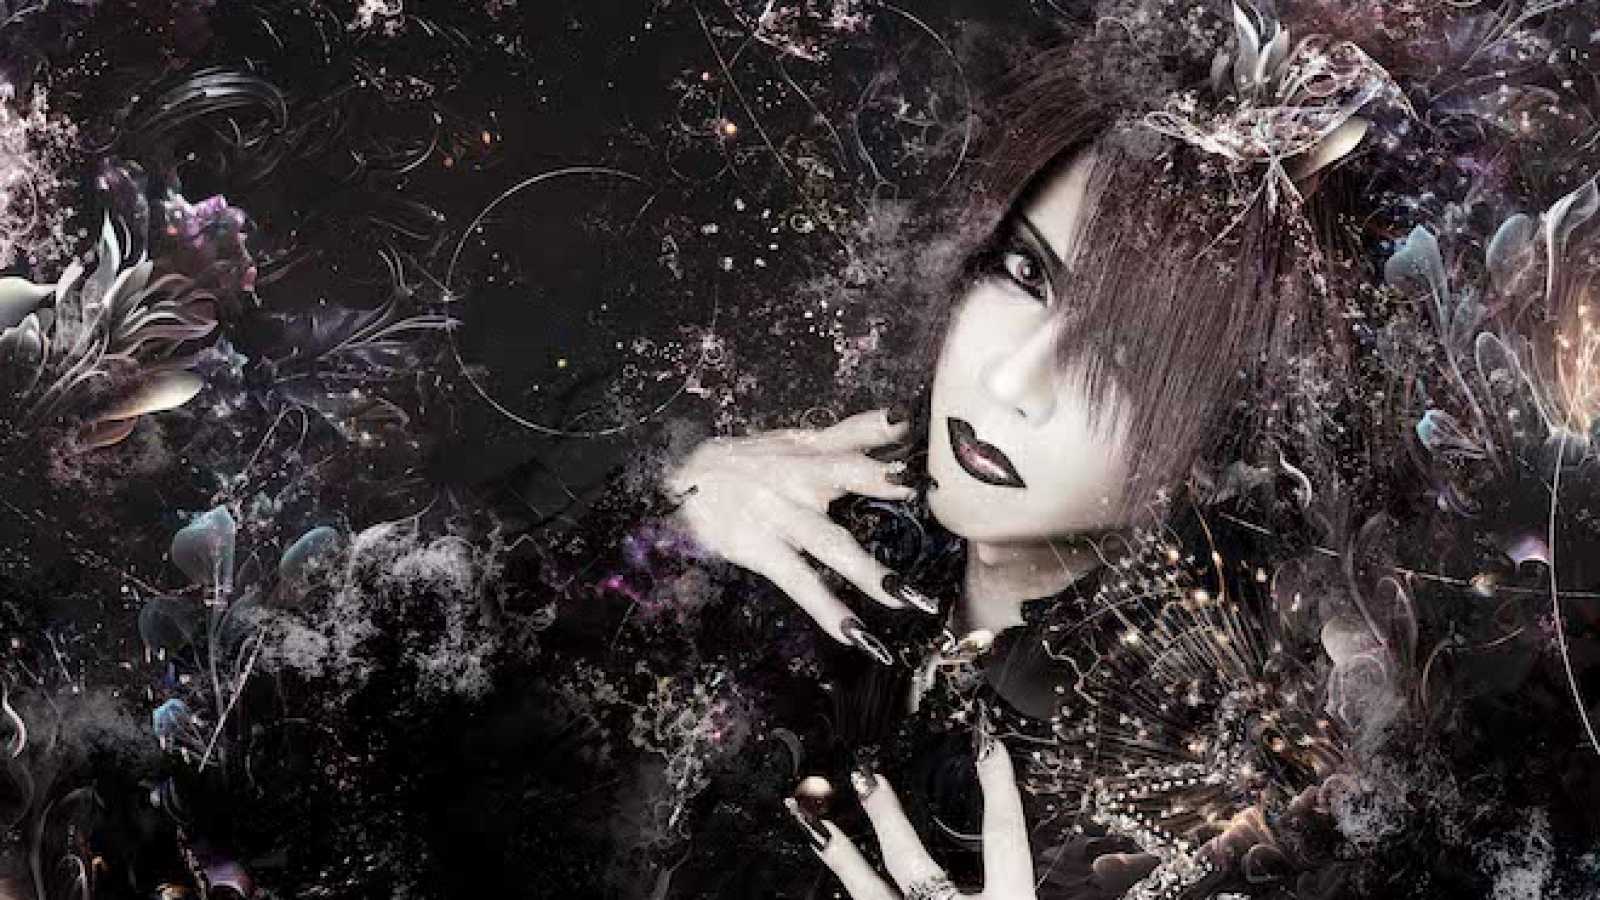 Three New Albums from KISAKI © KISAKI. All rights reserved.